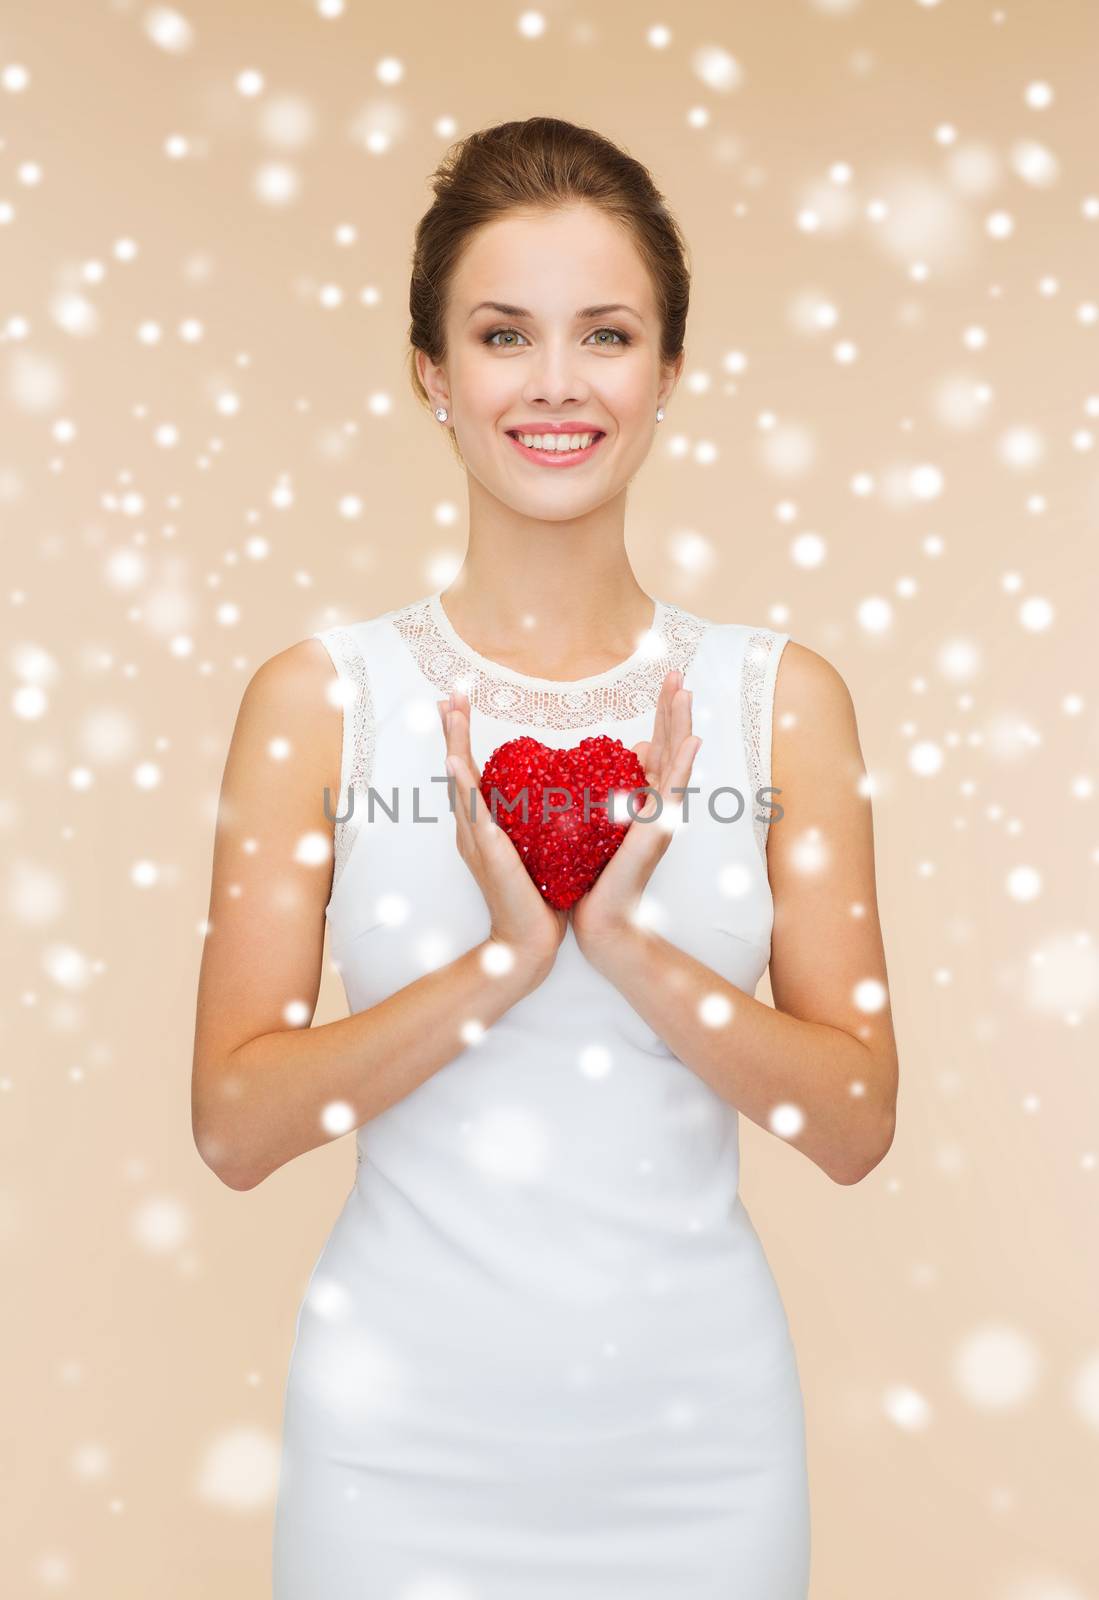 people, holidays, charity and love concept - smiling woman in white dress with red heart over beige background